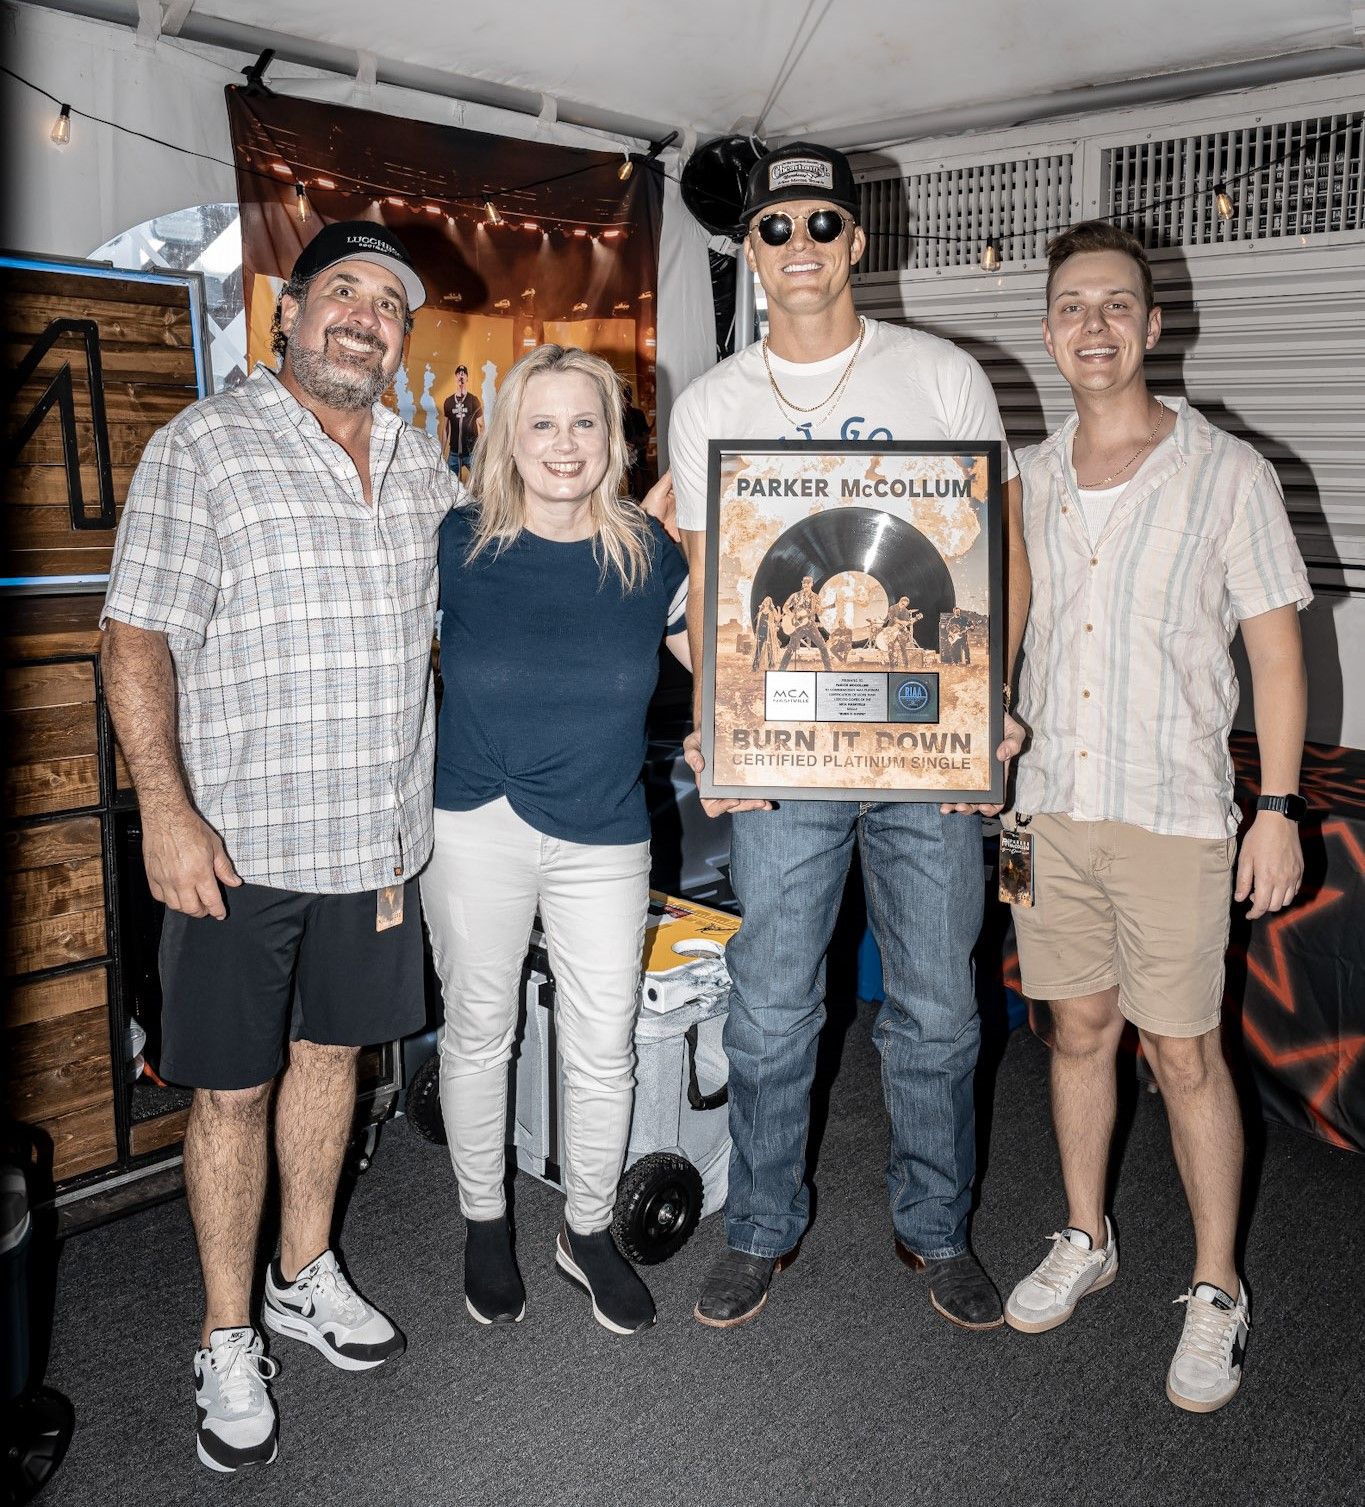 Parker McCollum Celebrates His Birthday with RIAA Certified Platinum Award for His Blazing Hit “Burn It Down”